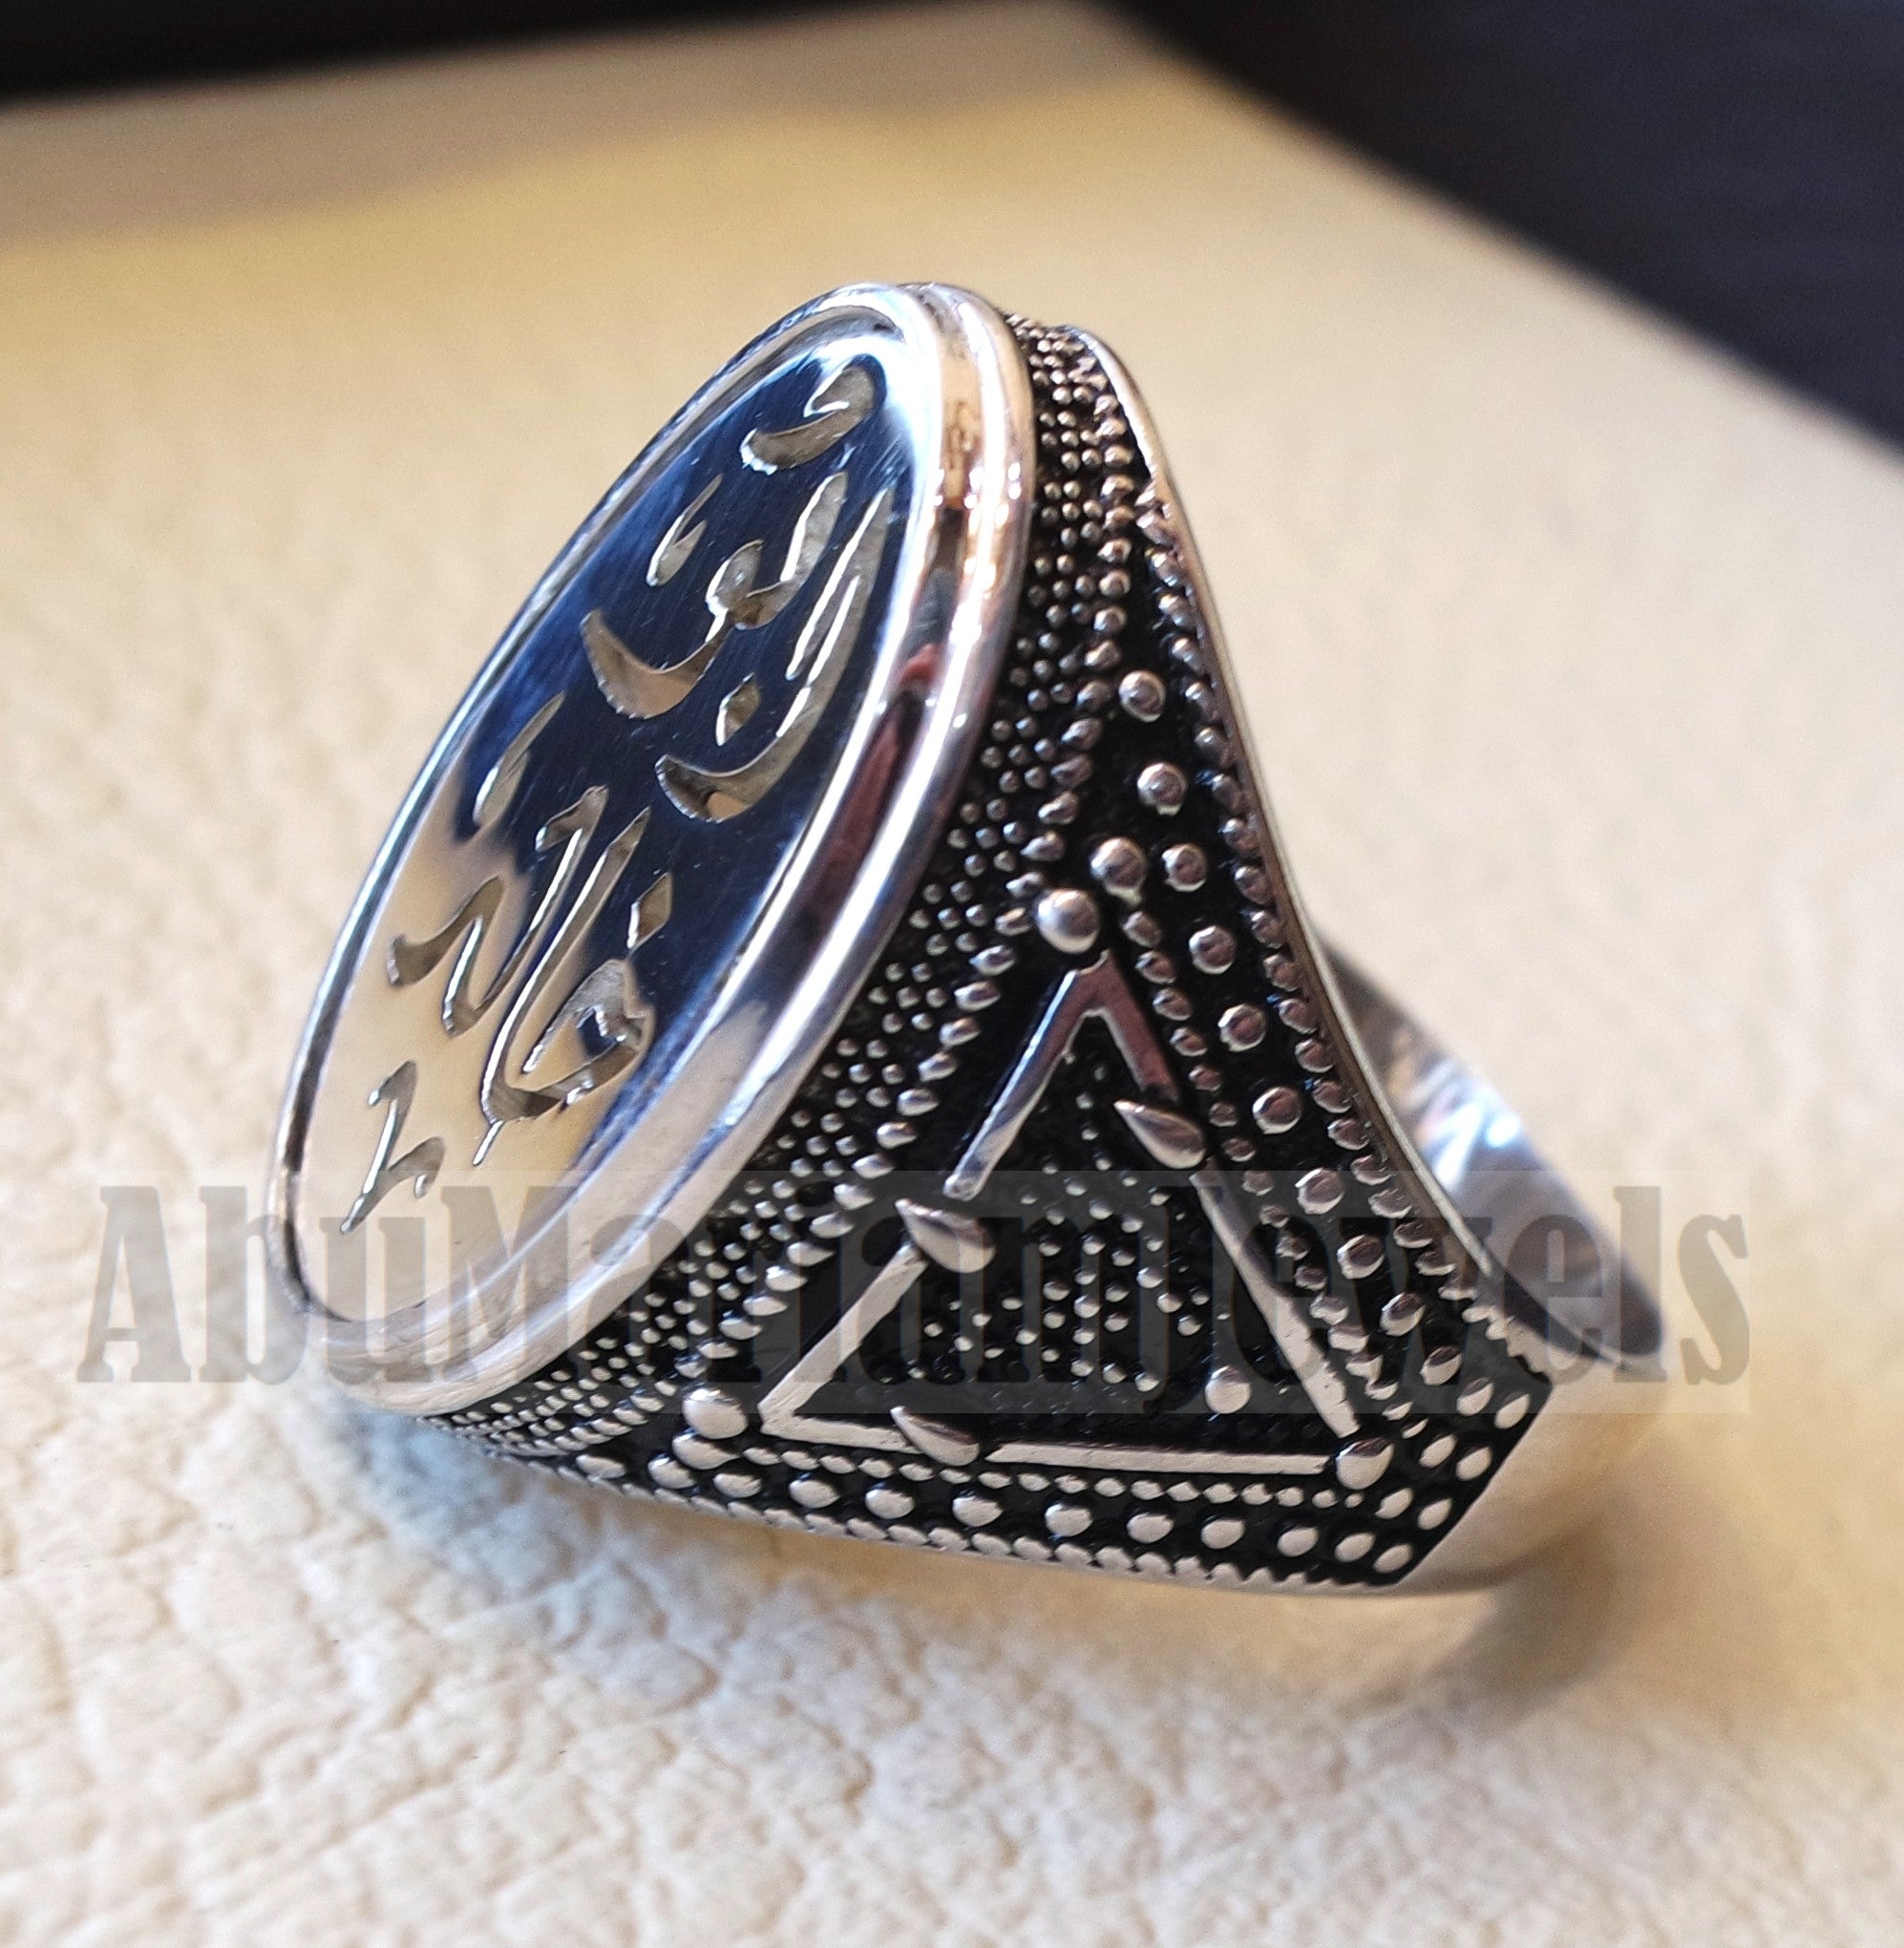 Customized Arabic calligraphy names ring personalized jewelry style sterling silver 925  any size TSN1003 خاتم اسم تفصيل